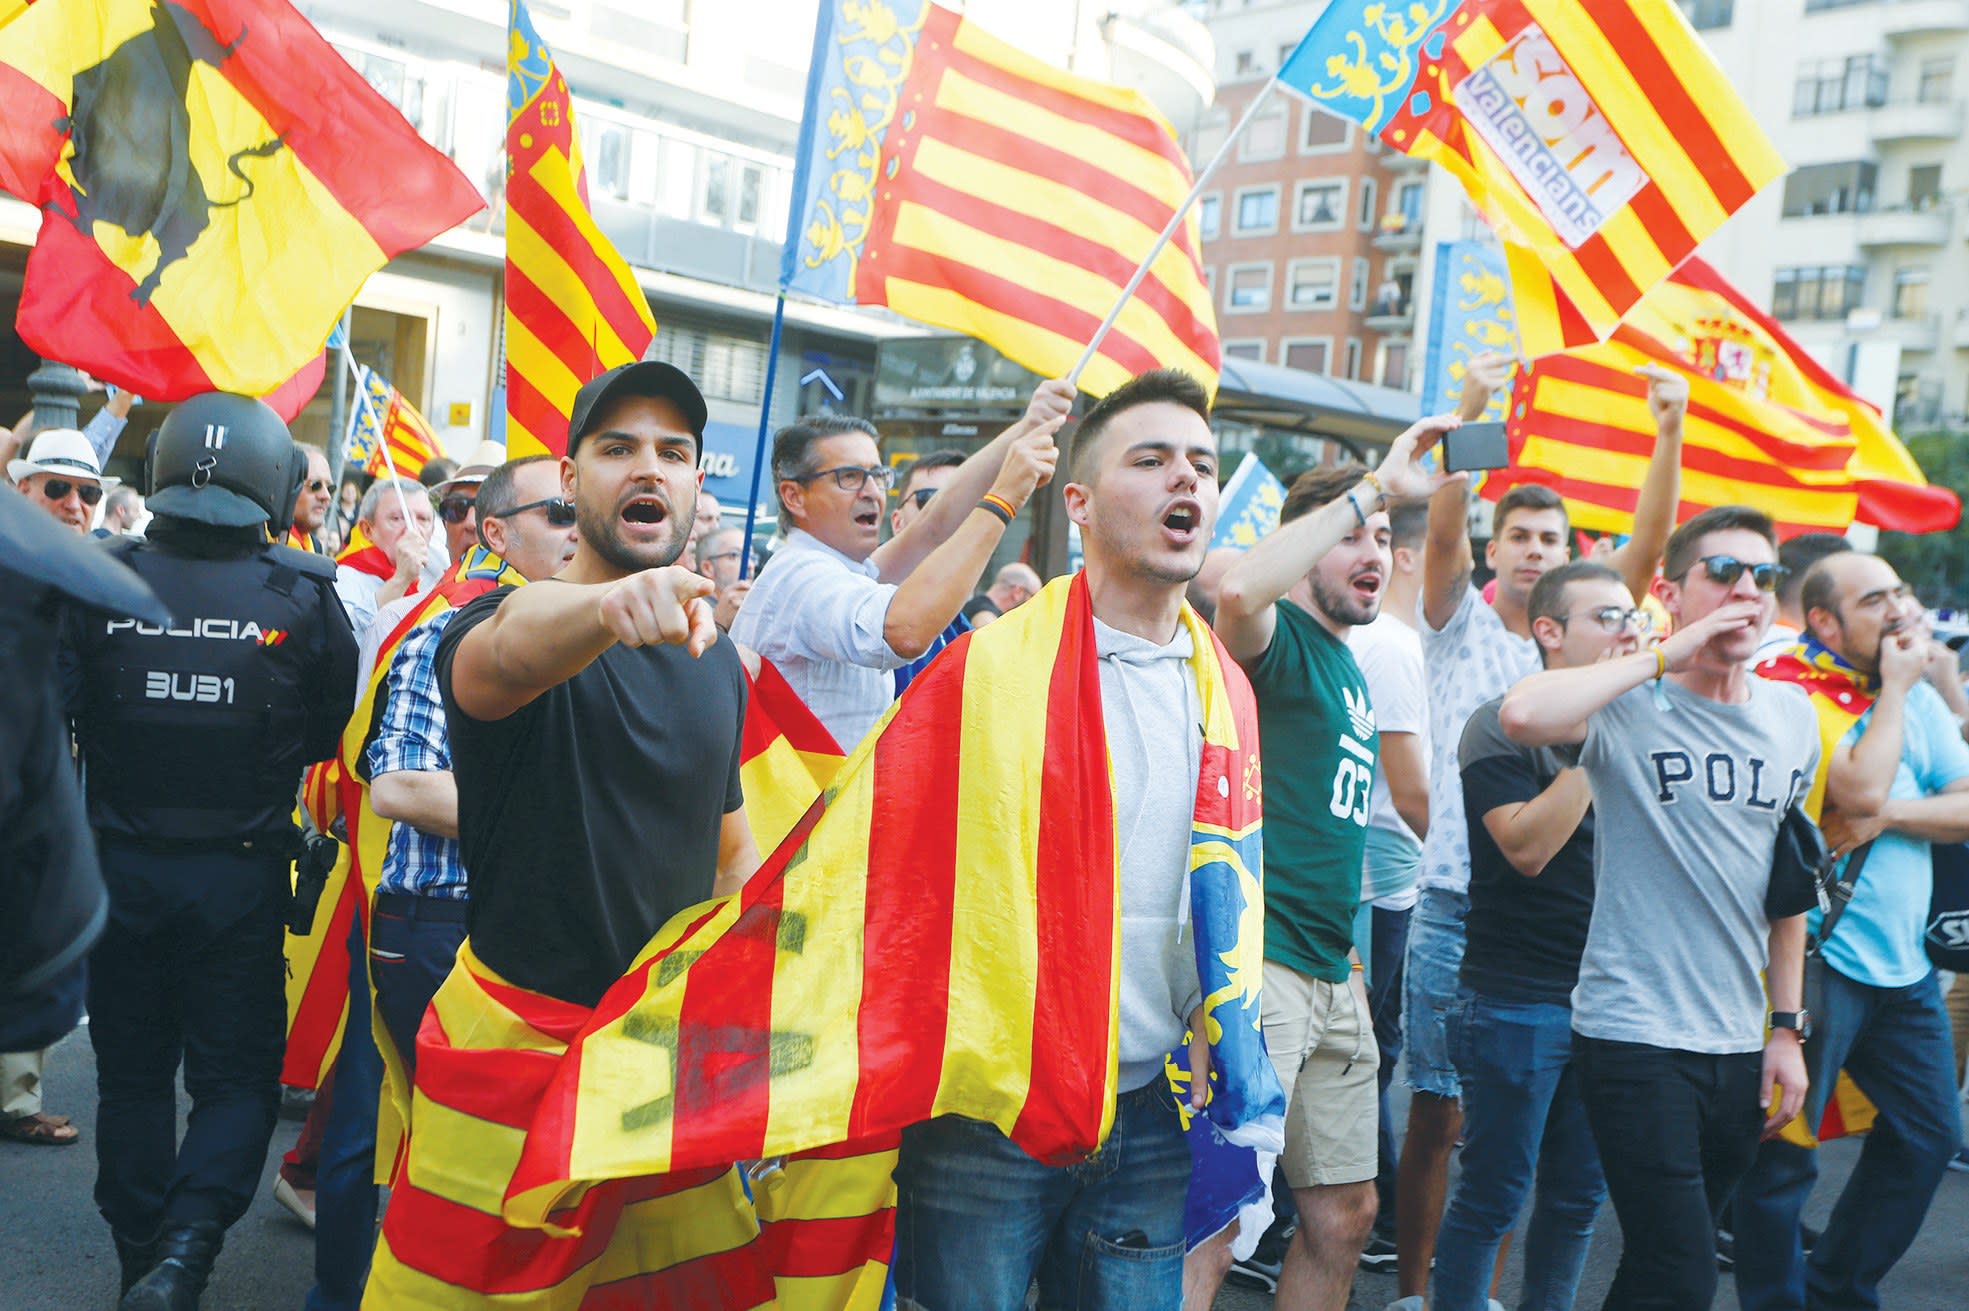 RIGHT-WING protesters wave Spanish and Valencian flags / REUTERS 